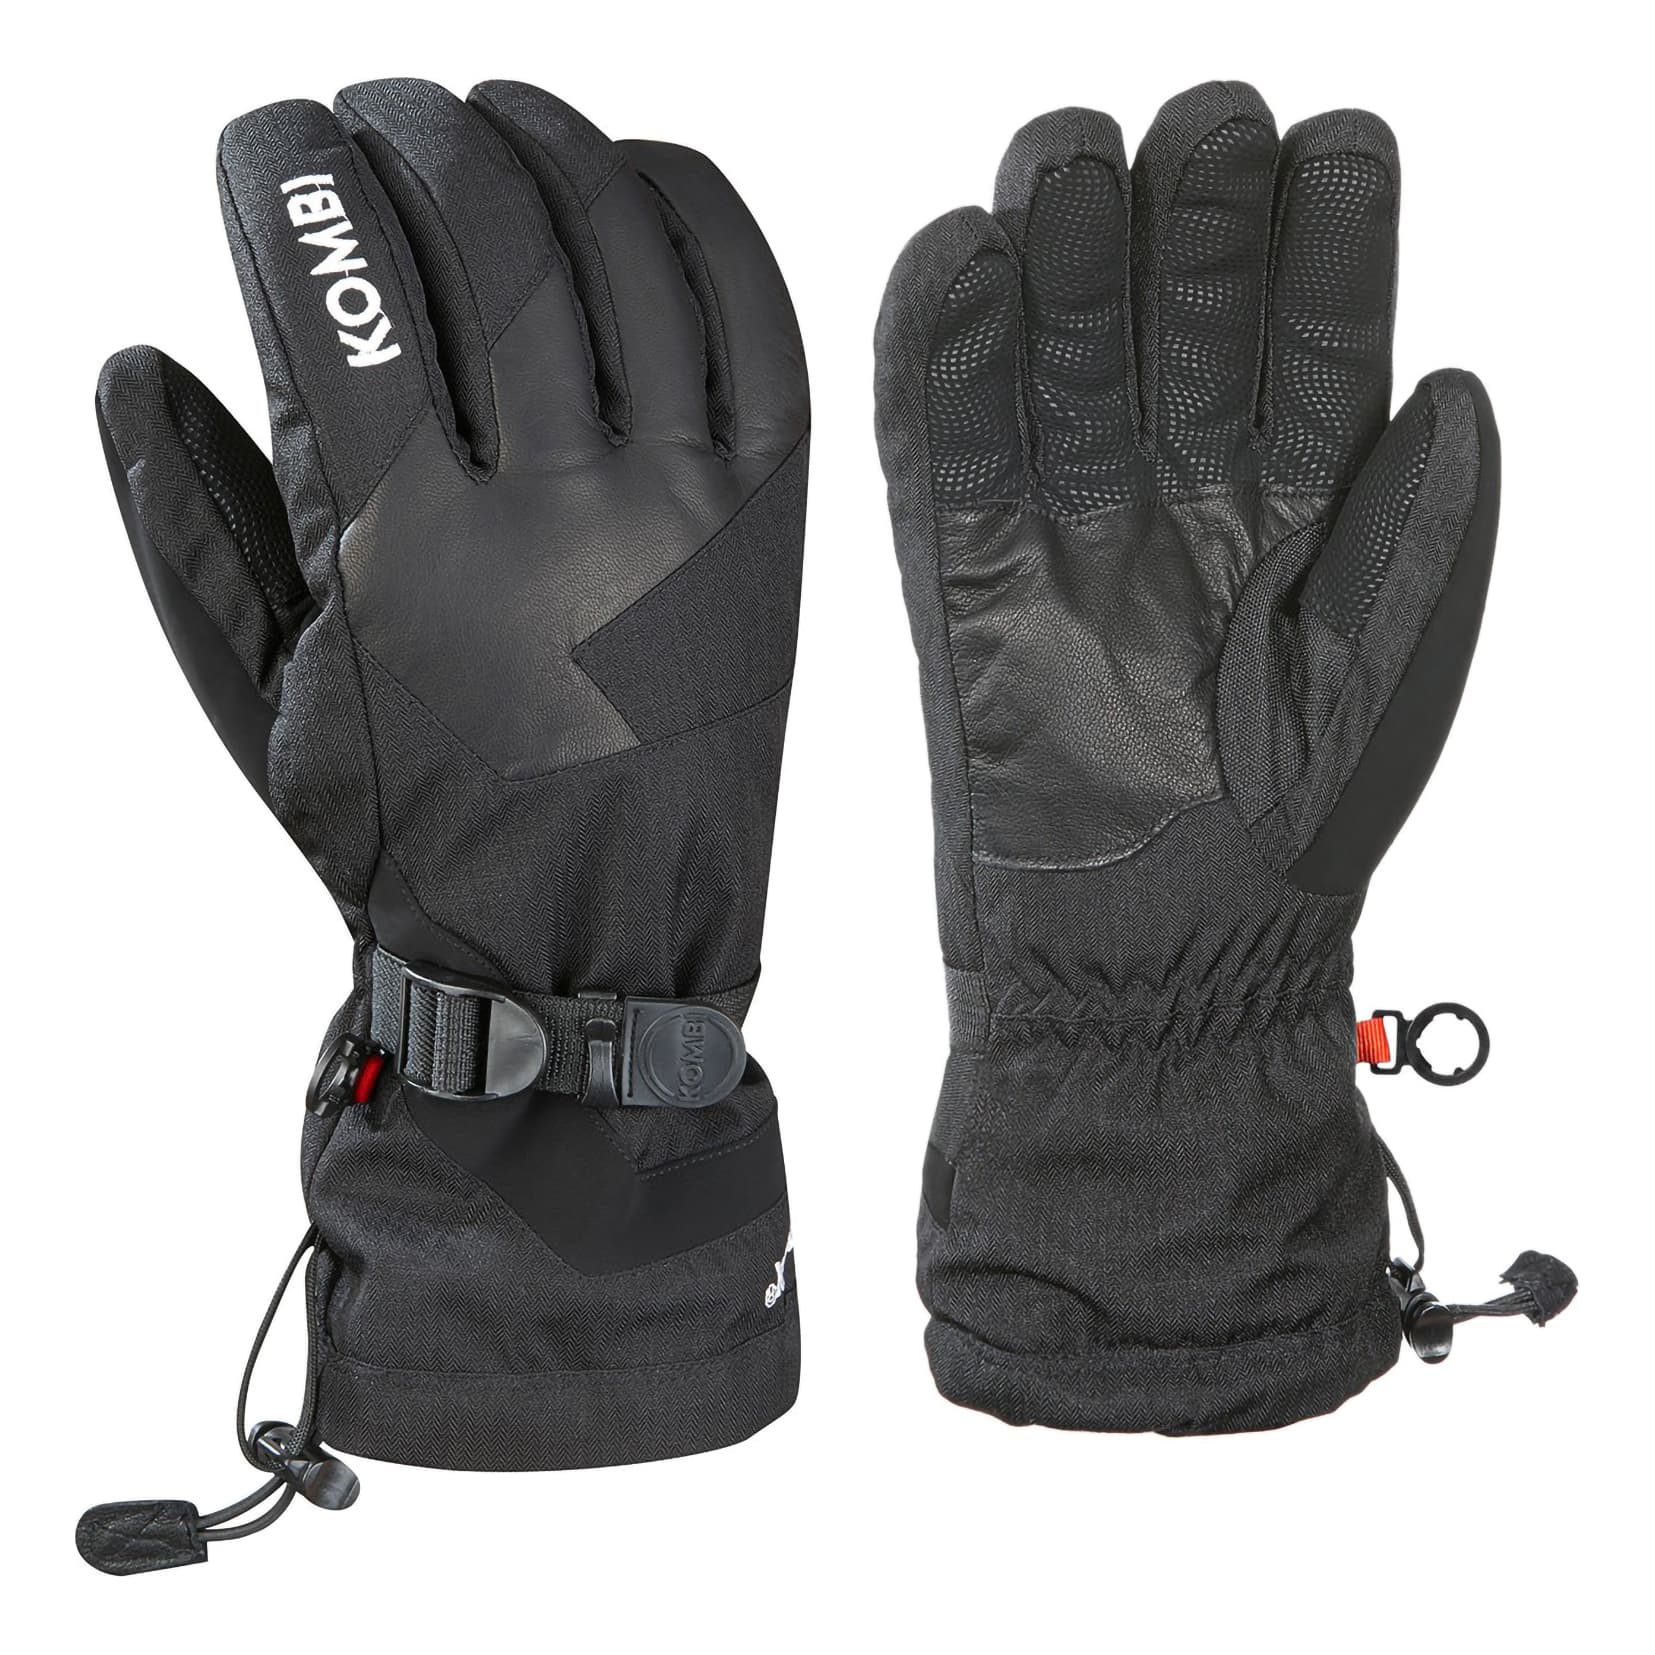 Kombi Men's Thermal Insulated Leather Palm Winter Ski Snowmobile